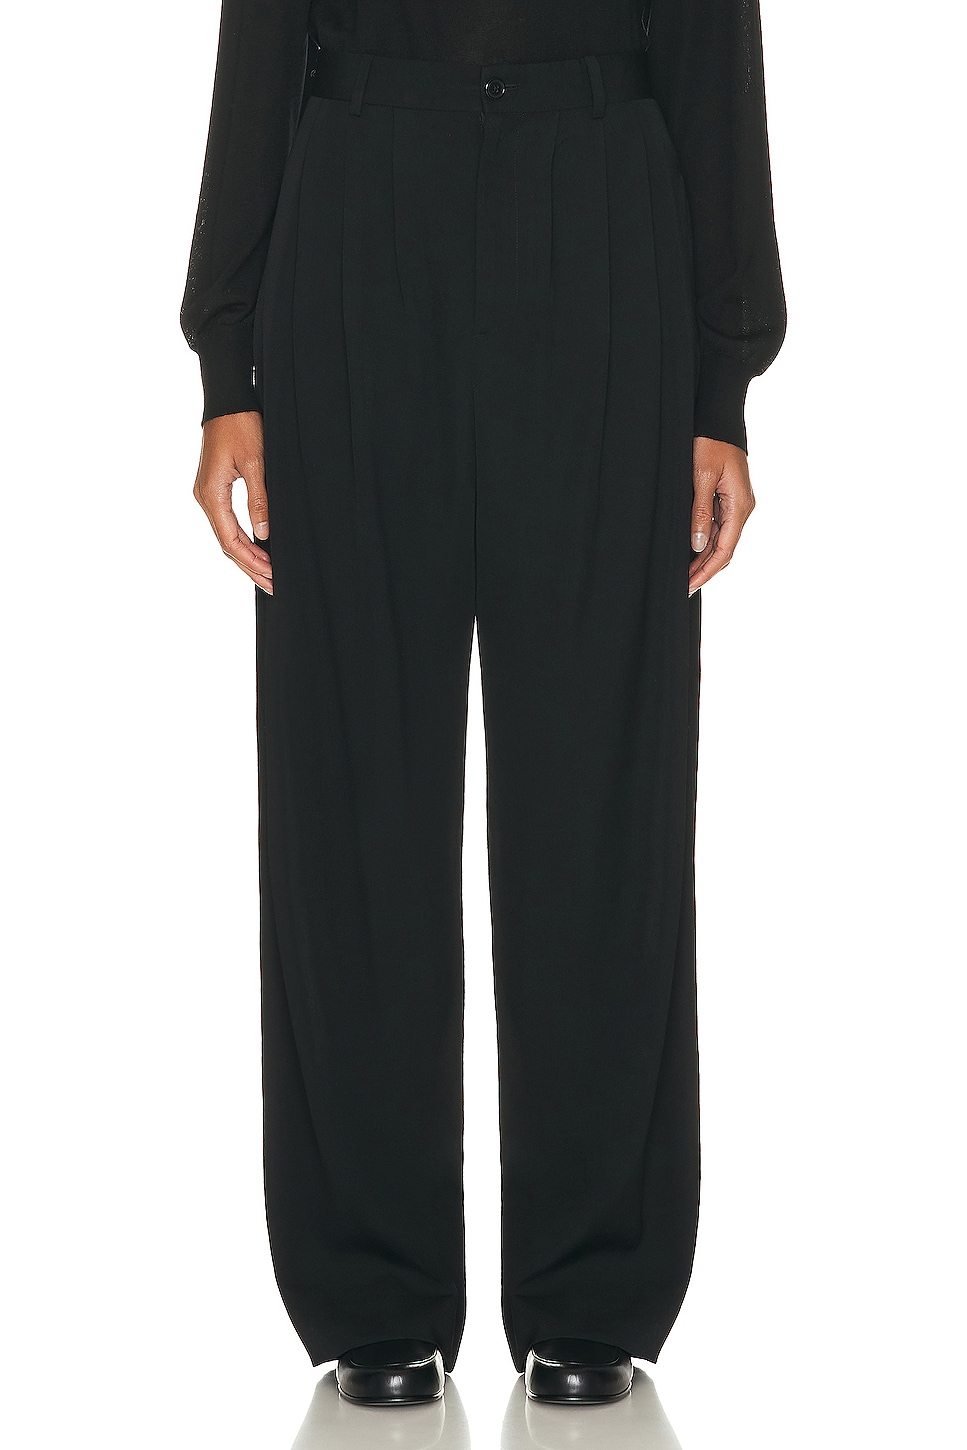 Image 1 of The Row Rufos Pant in Black